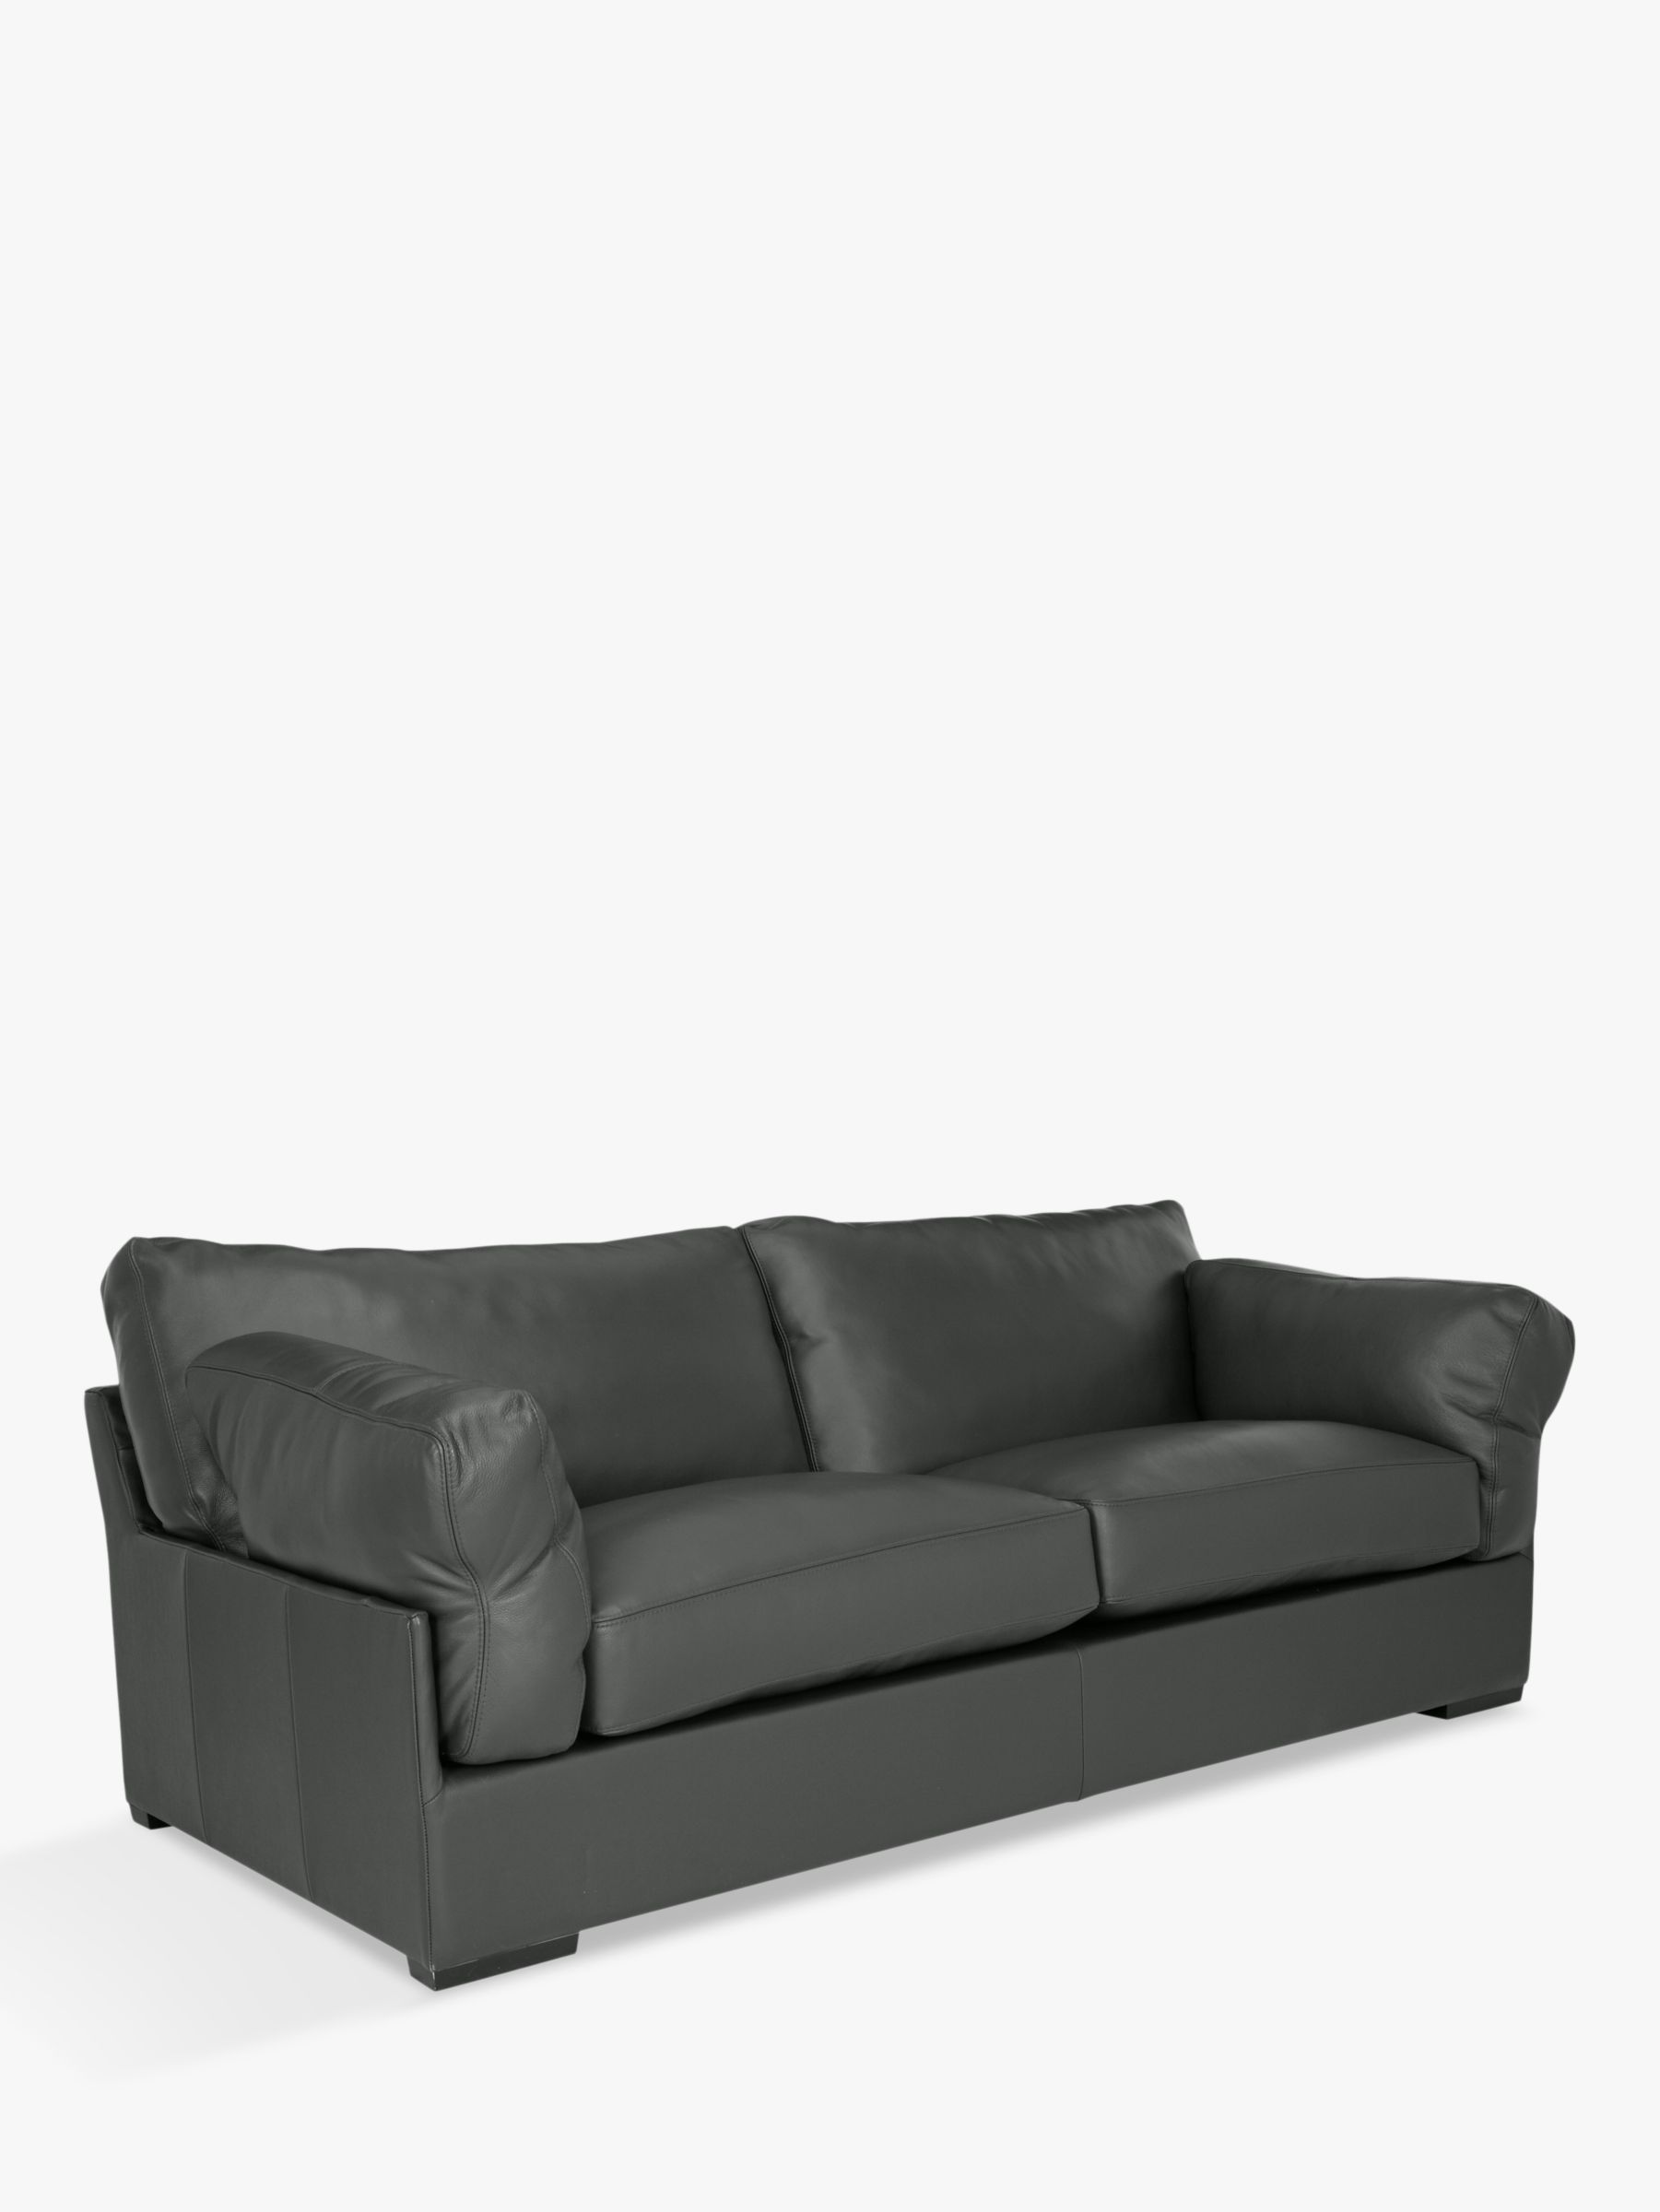 John Lewis Java Leather Large 3 Seater Sofa Review